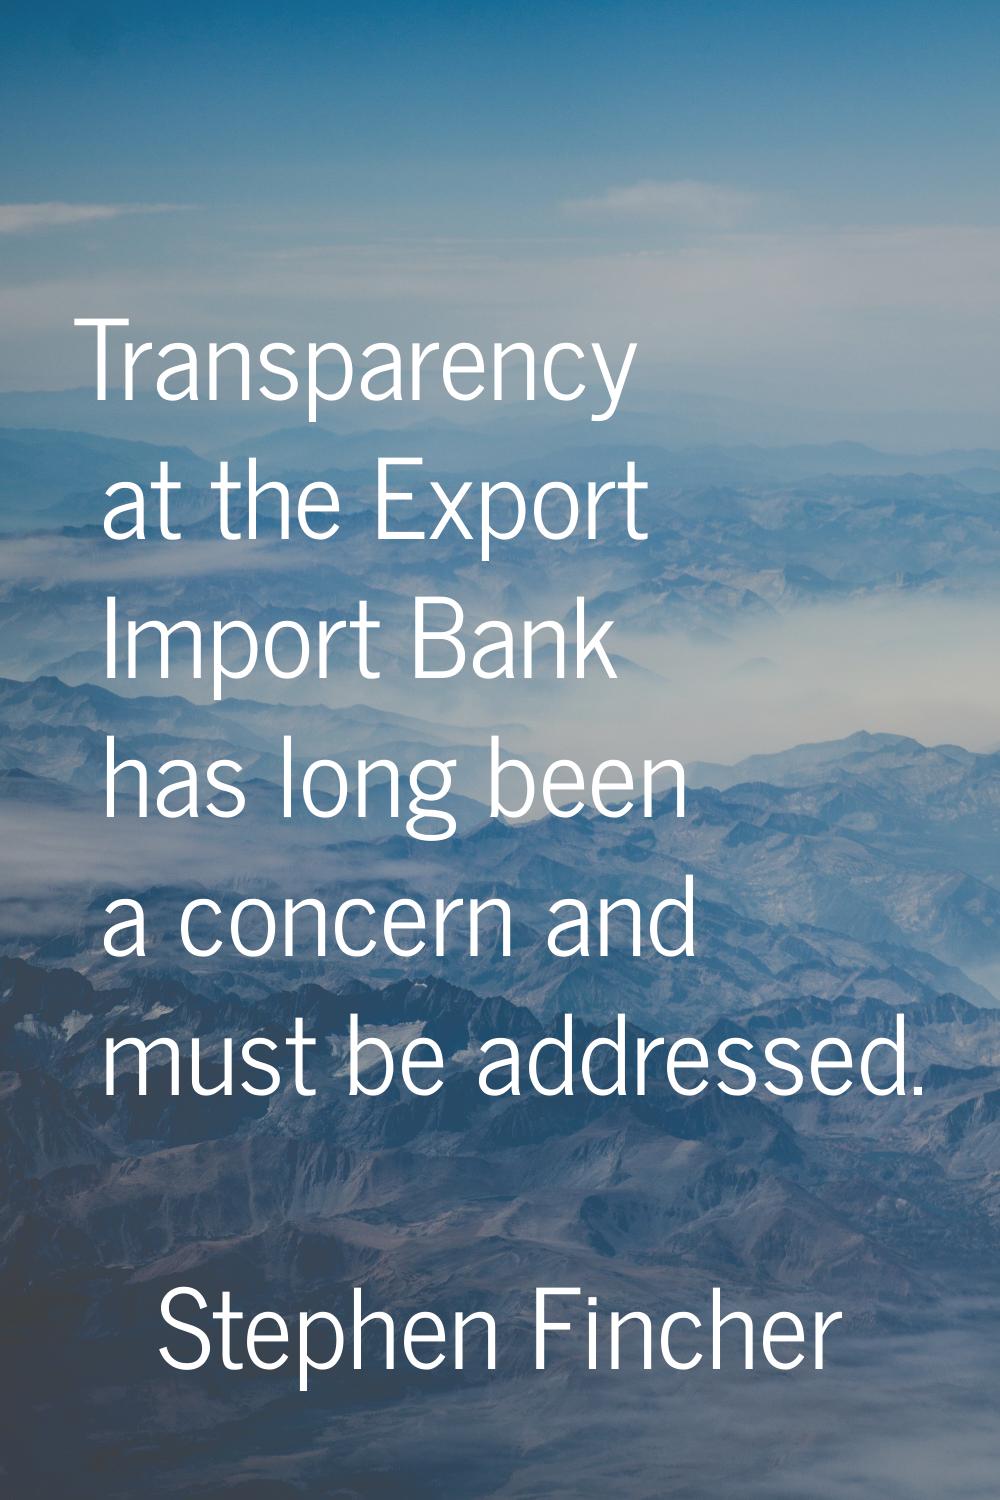 Transparency at the Export Import Bank has long been a concern and must be addressed.